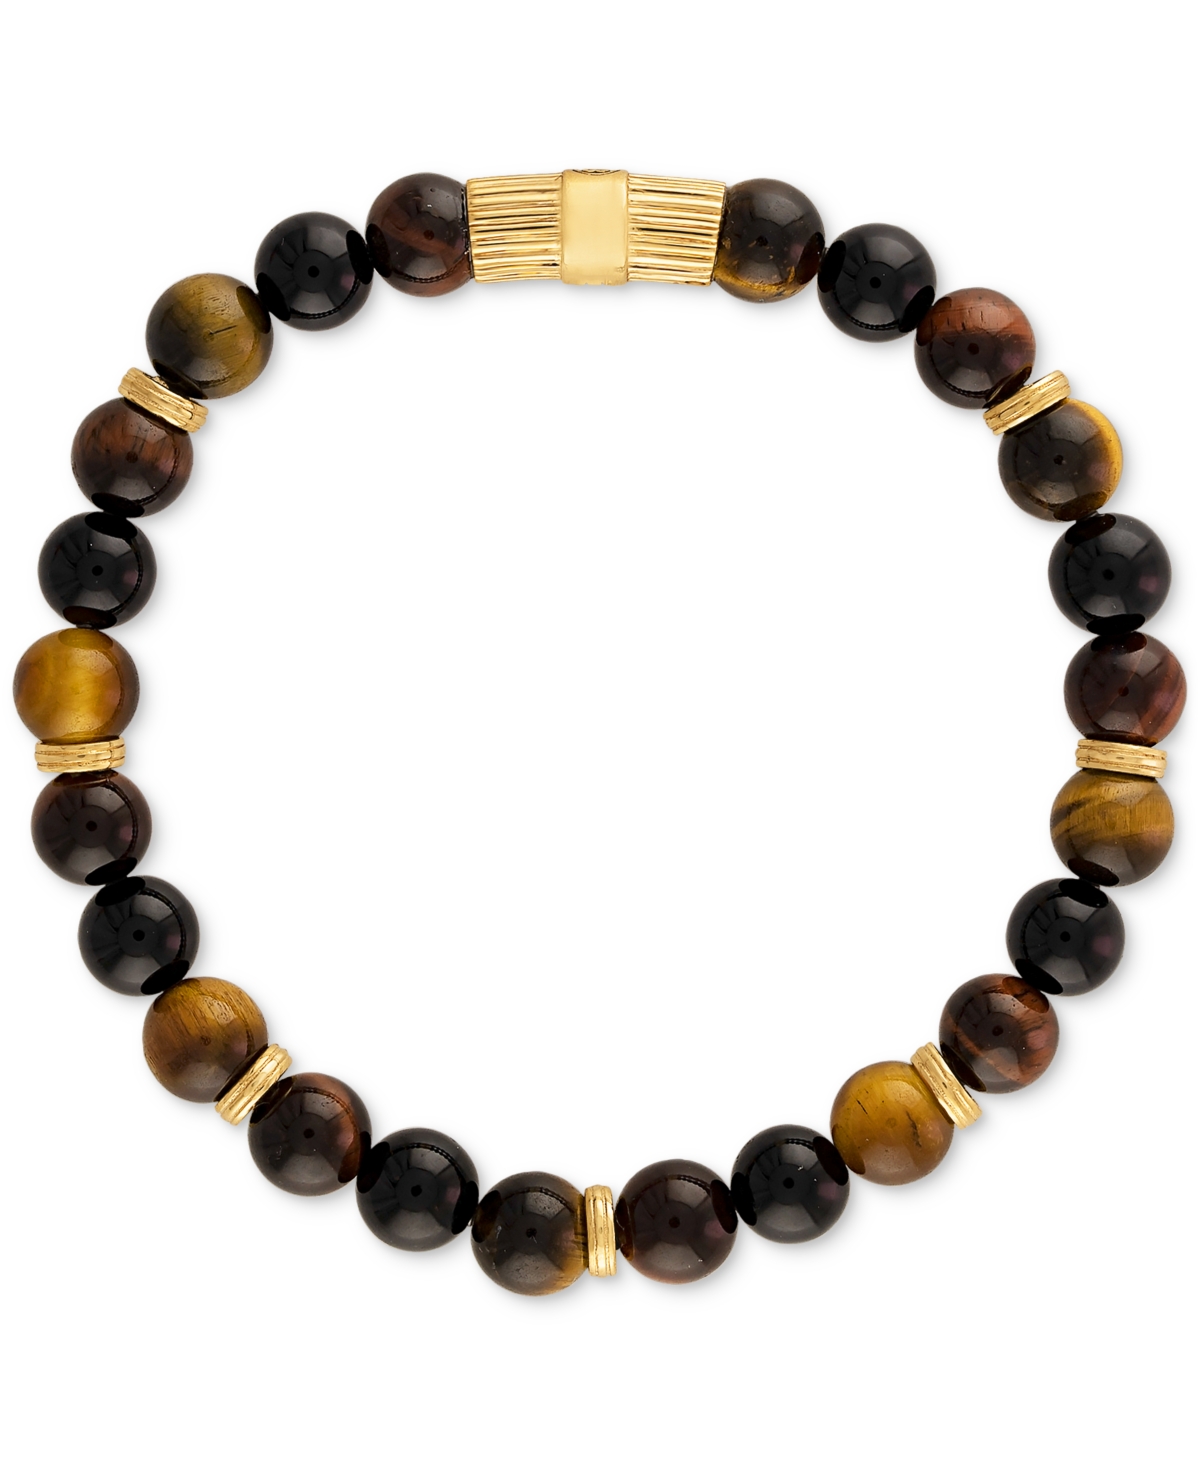 Esquire Men's Jewelry Multicolor Tiger Eye Beaded Stretch Bracelet in 14k Gold-Plated Sterling Silver (Also in Green Tiger Eye), Created for Macy's